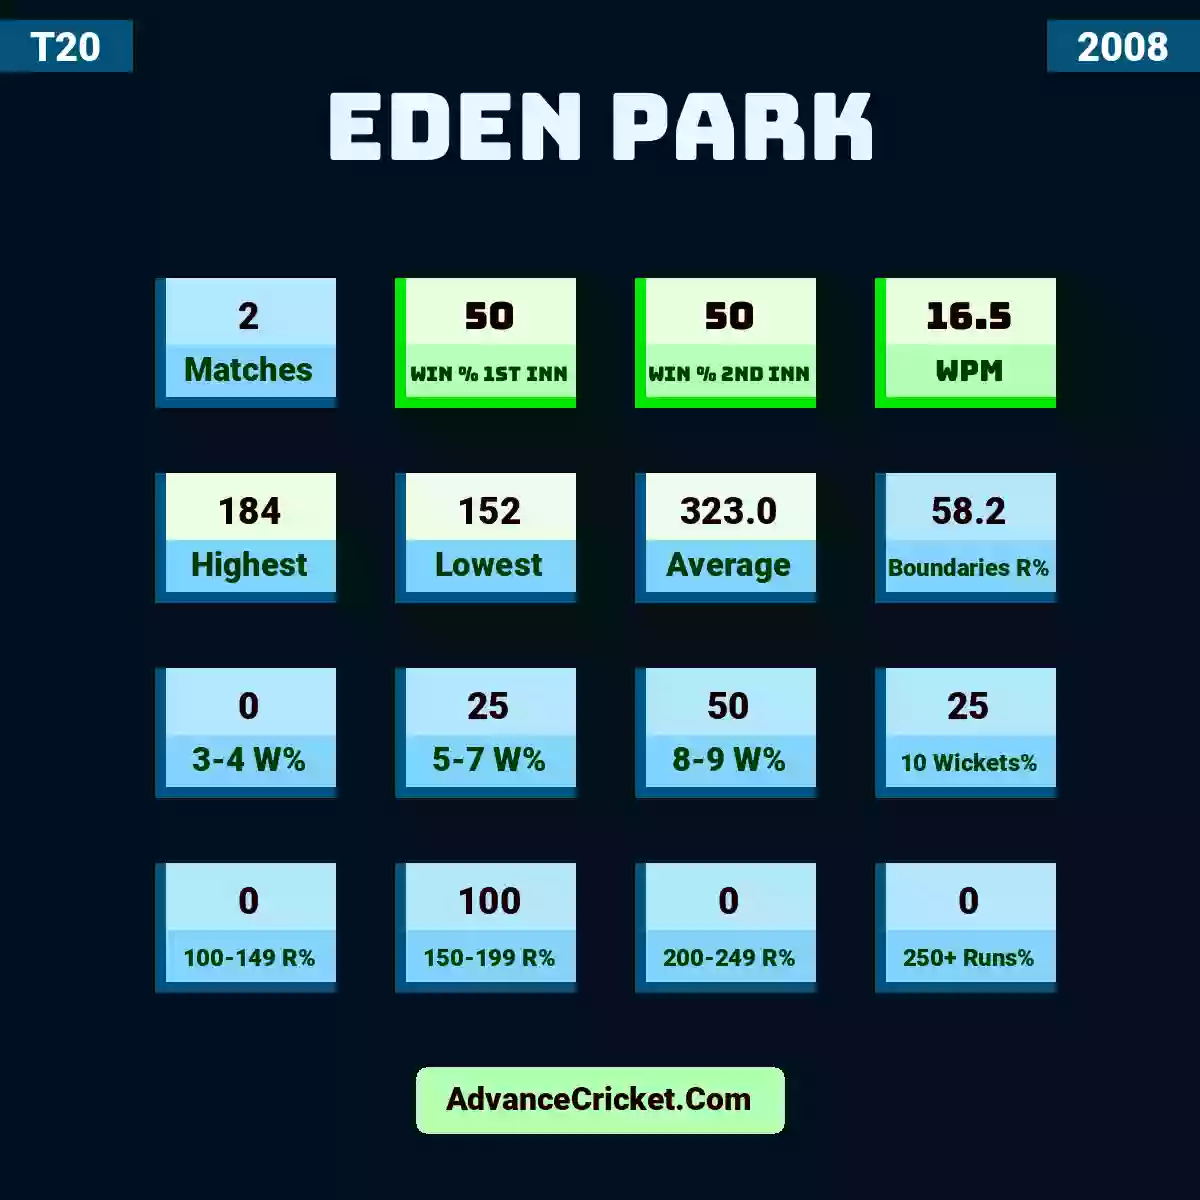 Image showing Eden Park with Matches: 2, Win % 1st Inn: 50, Win % 2nd Inn: 50, WPM: 16.5, Highest: 184, Lowest: 152, Average: 323.0, Boundaries R%: 58.2, 3-4 W%: 0, 5-7 W%: 25, 8-9 W%: 50, 10 Wickets%: 25, 100-149 R%: 0, 150-199 R%: 100, 200-249 R%: 0, 250+ Runs%: 0.